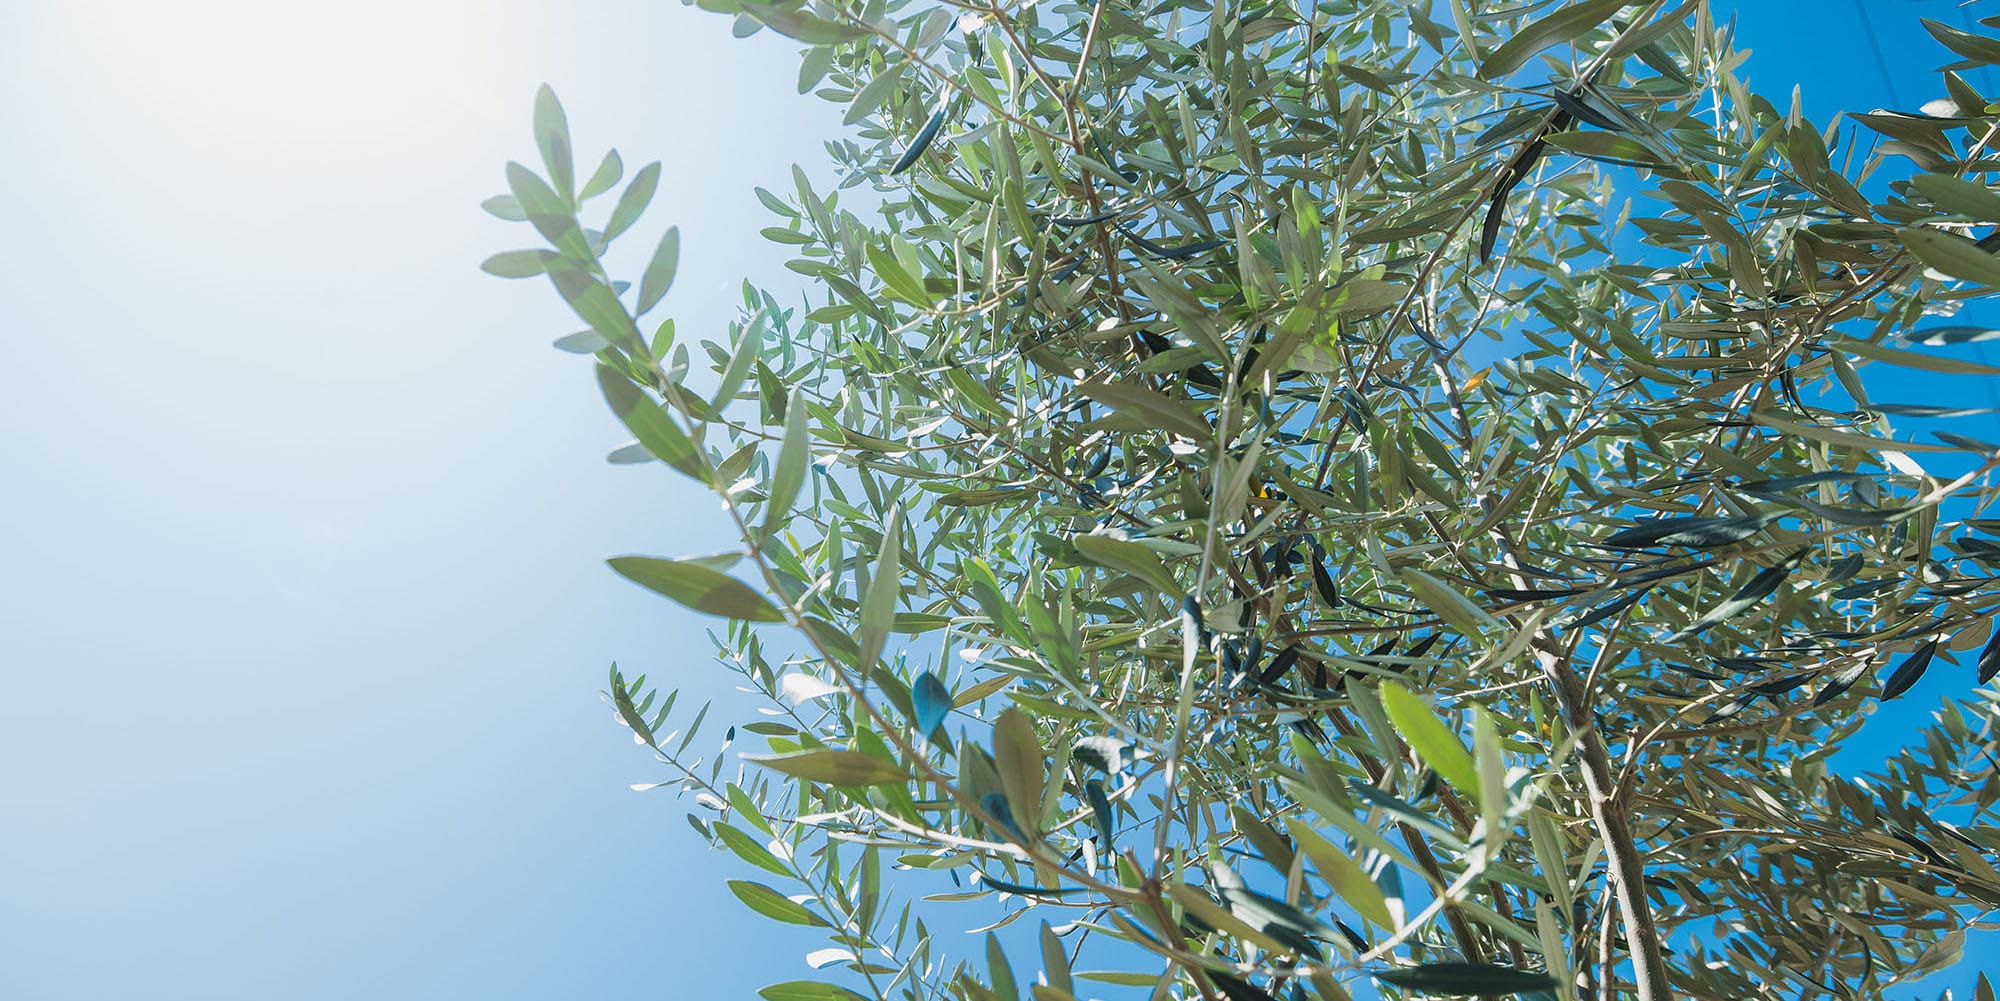 The Olive Tree Pet Cemetery